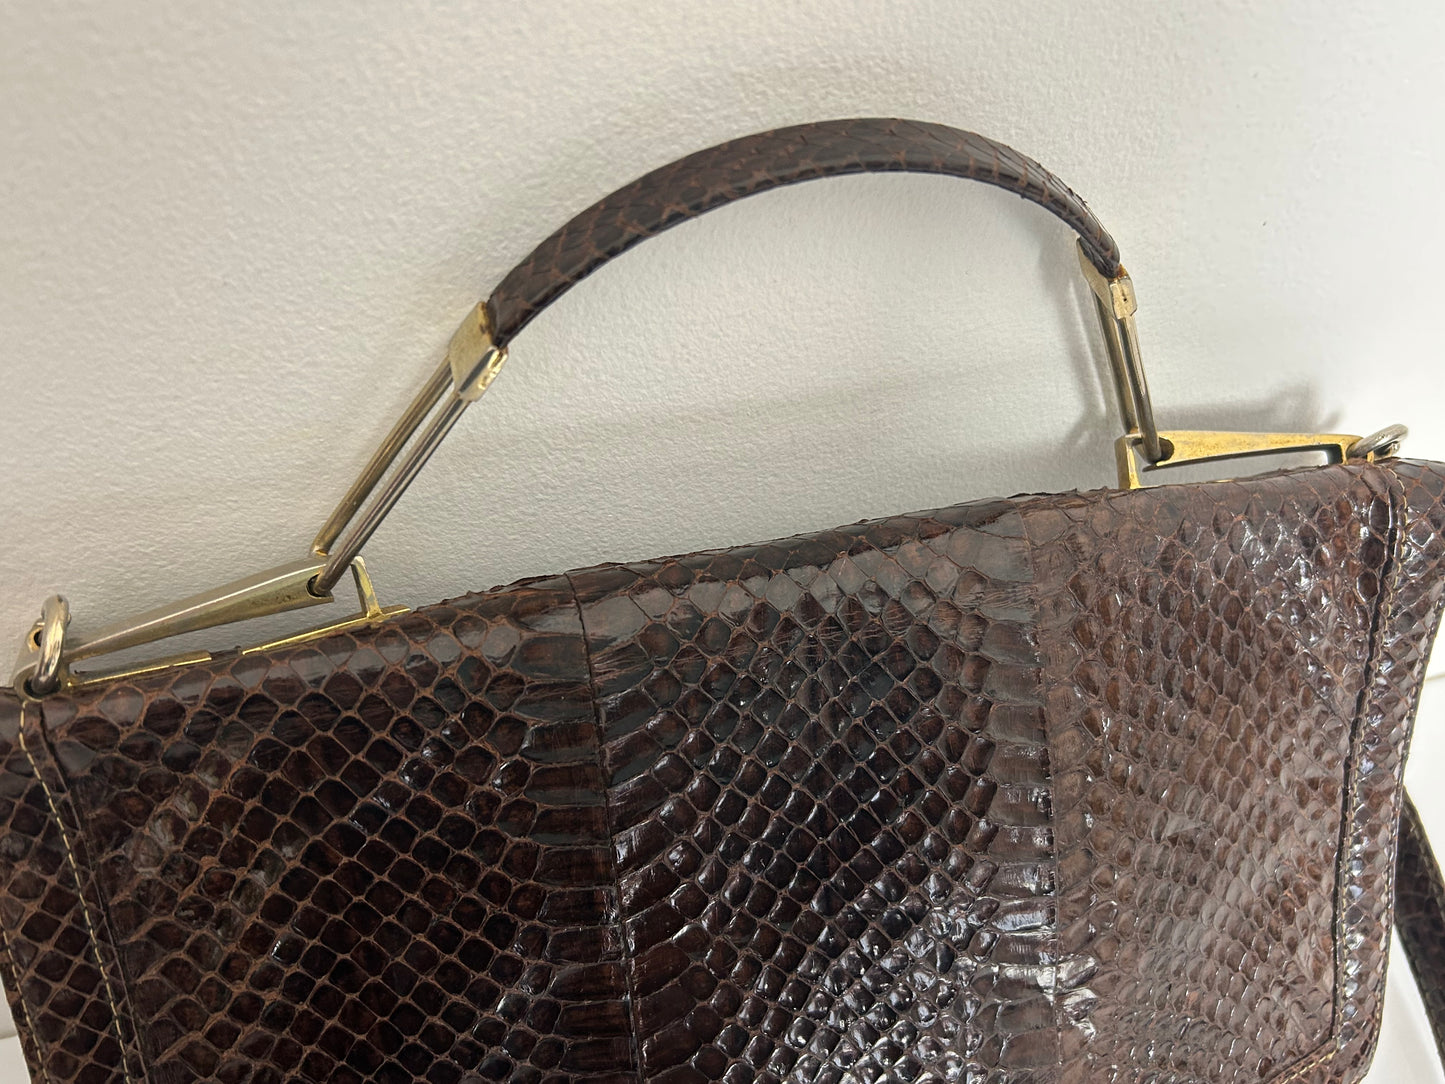 Vintage 1970s Italian Brown Reptile Leather Handbag With Removable Shoulder Strap